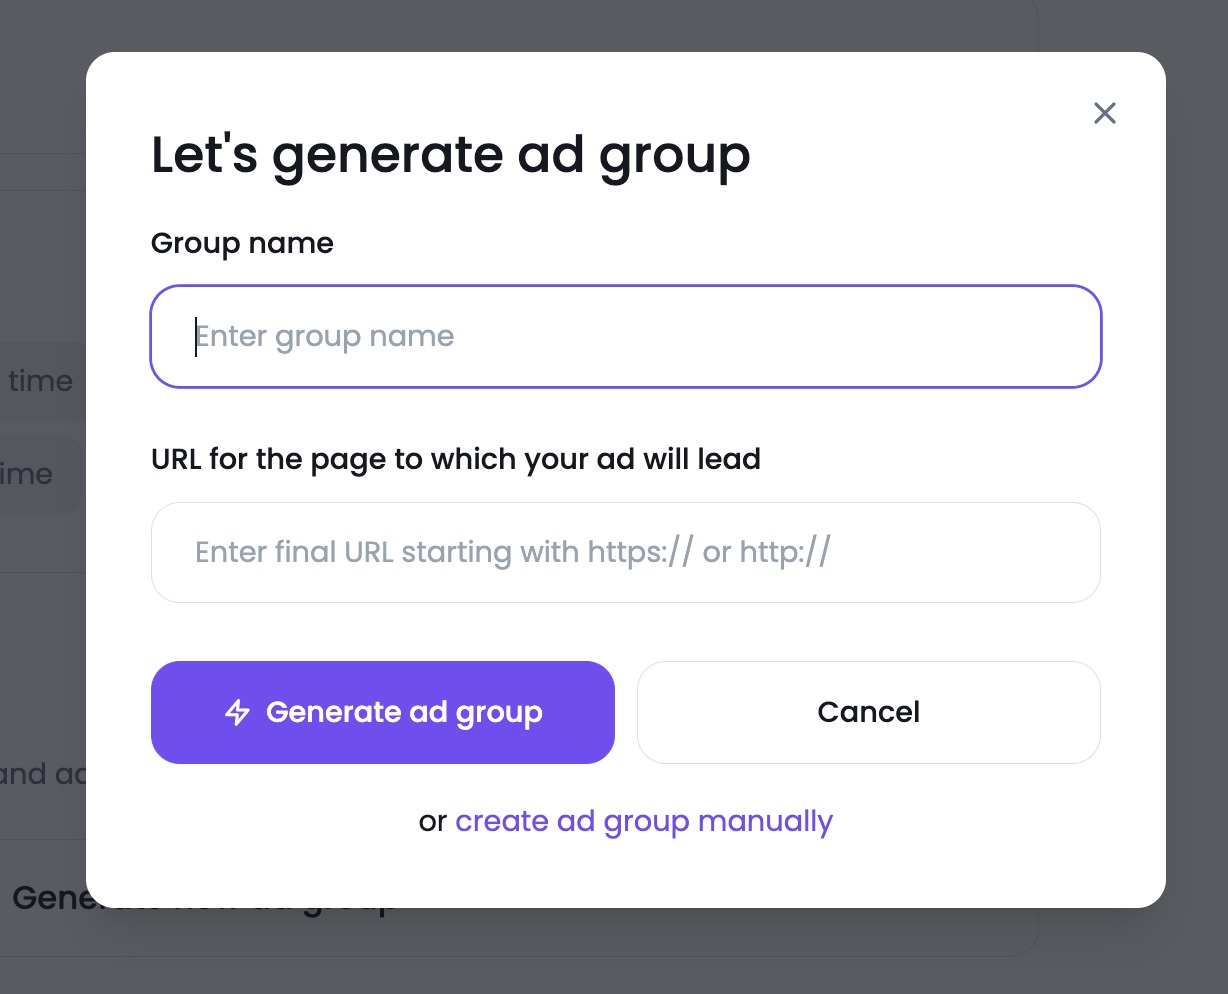 An example of the Let's generate ad group pop-up window.